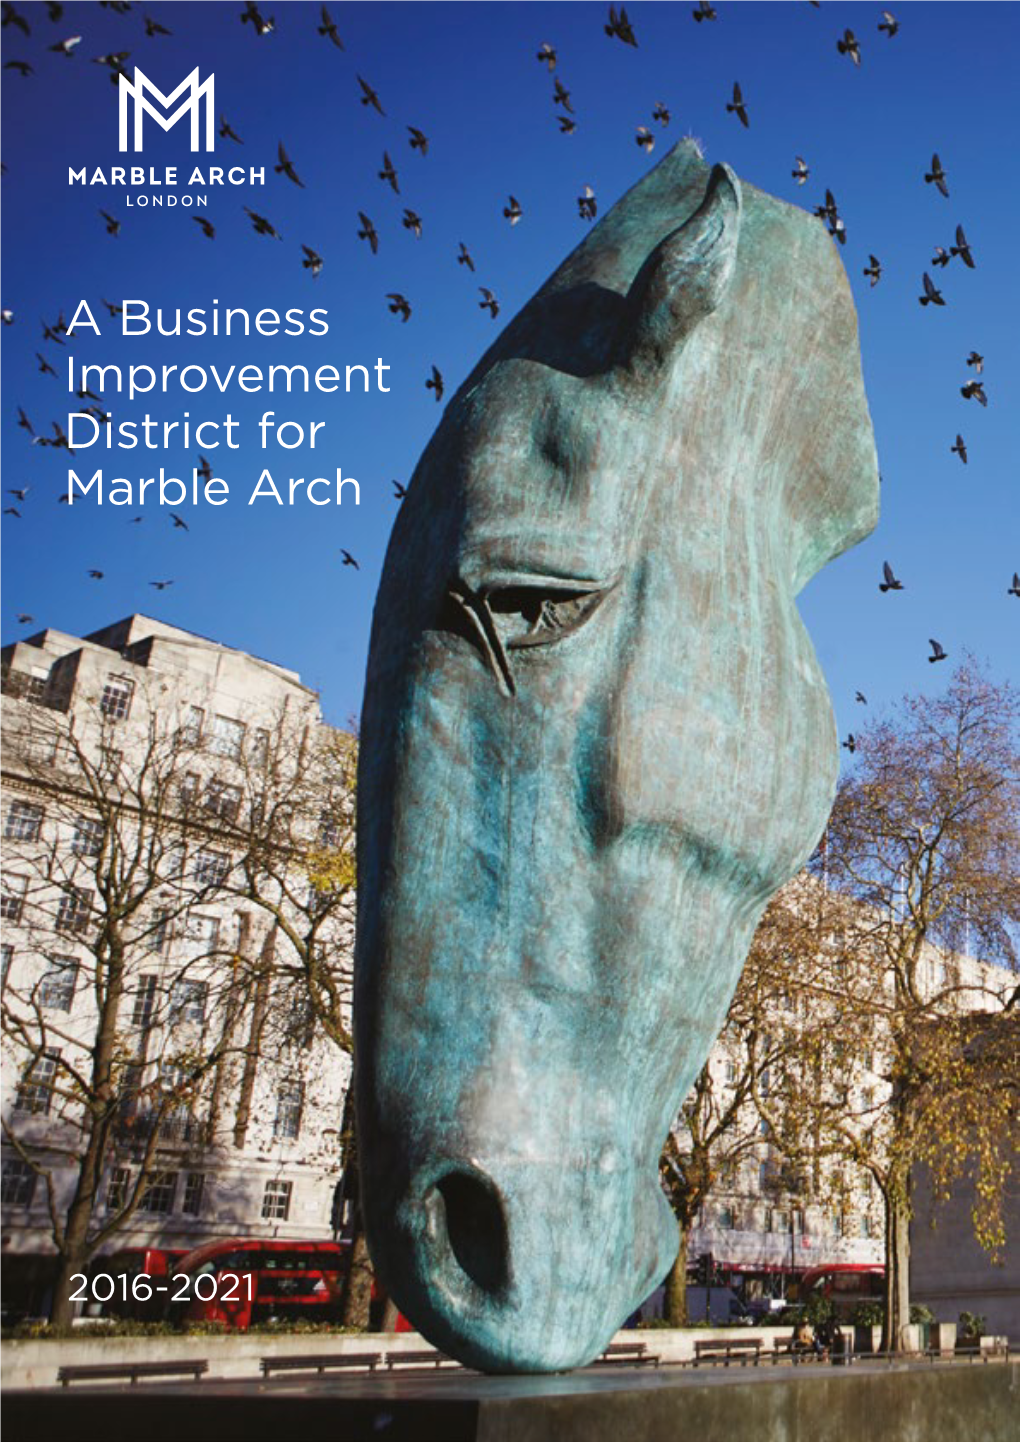 A Business Improvement District for Marble Arch